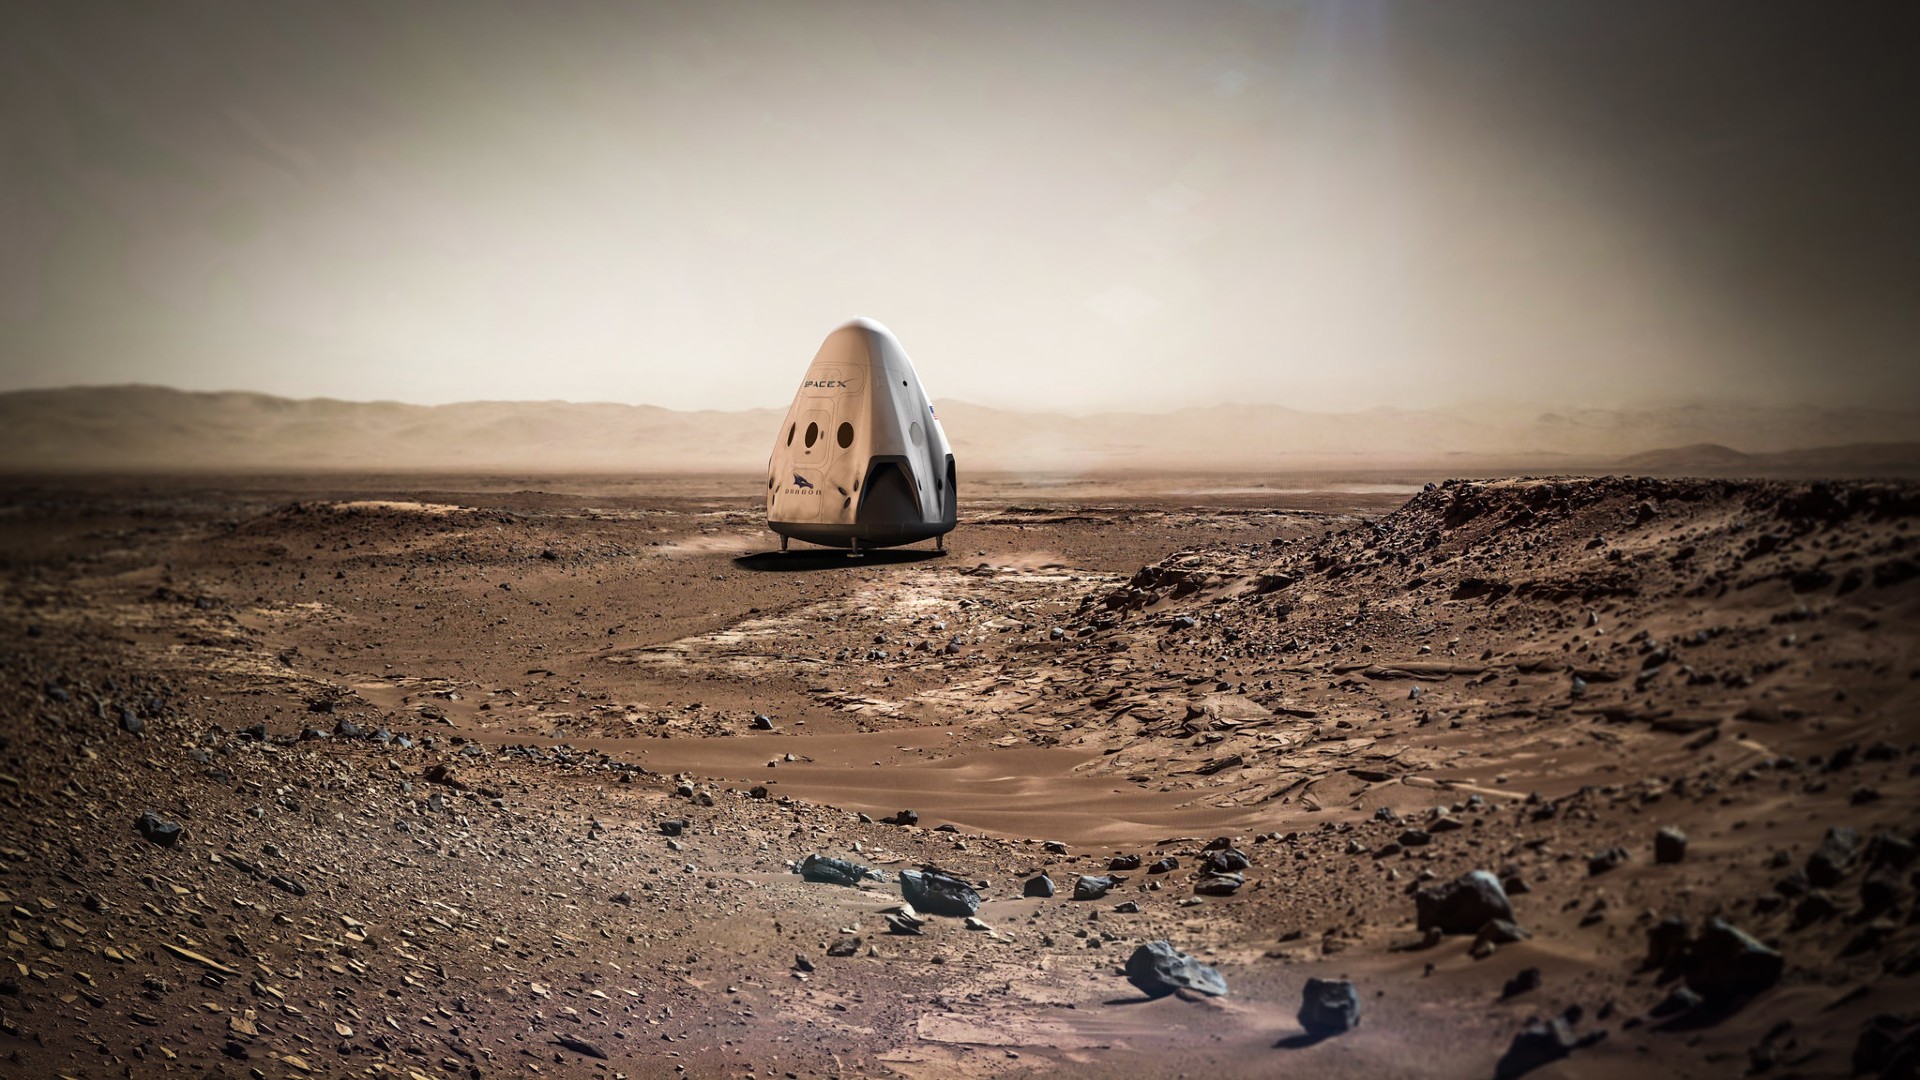 An illustration of the SpaceX Dragon capsule landing on Mars.